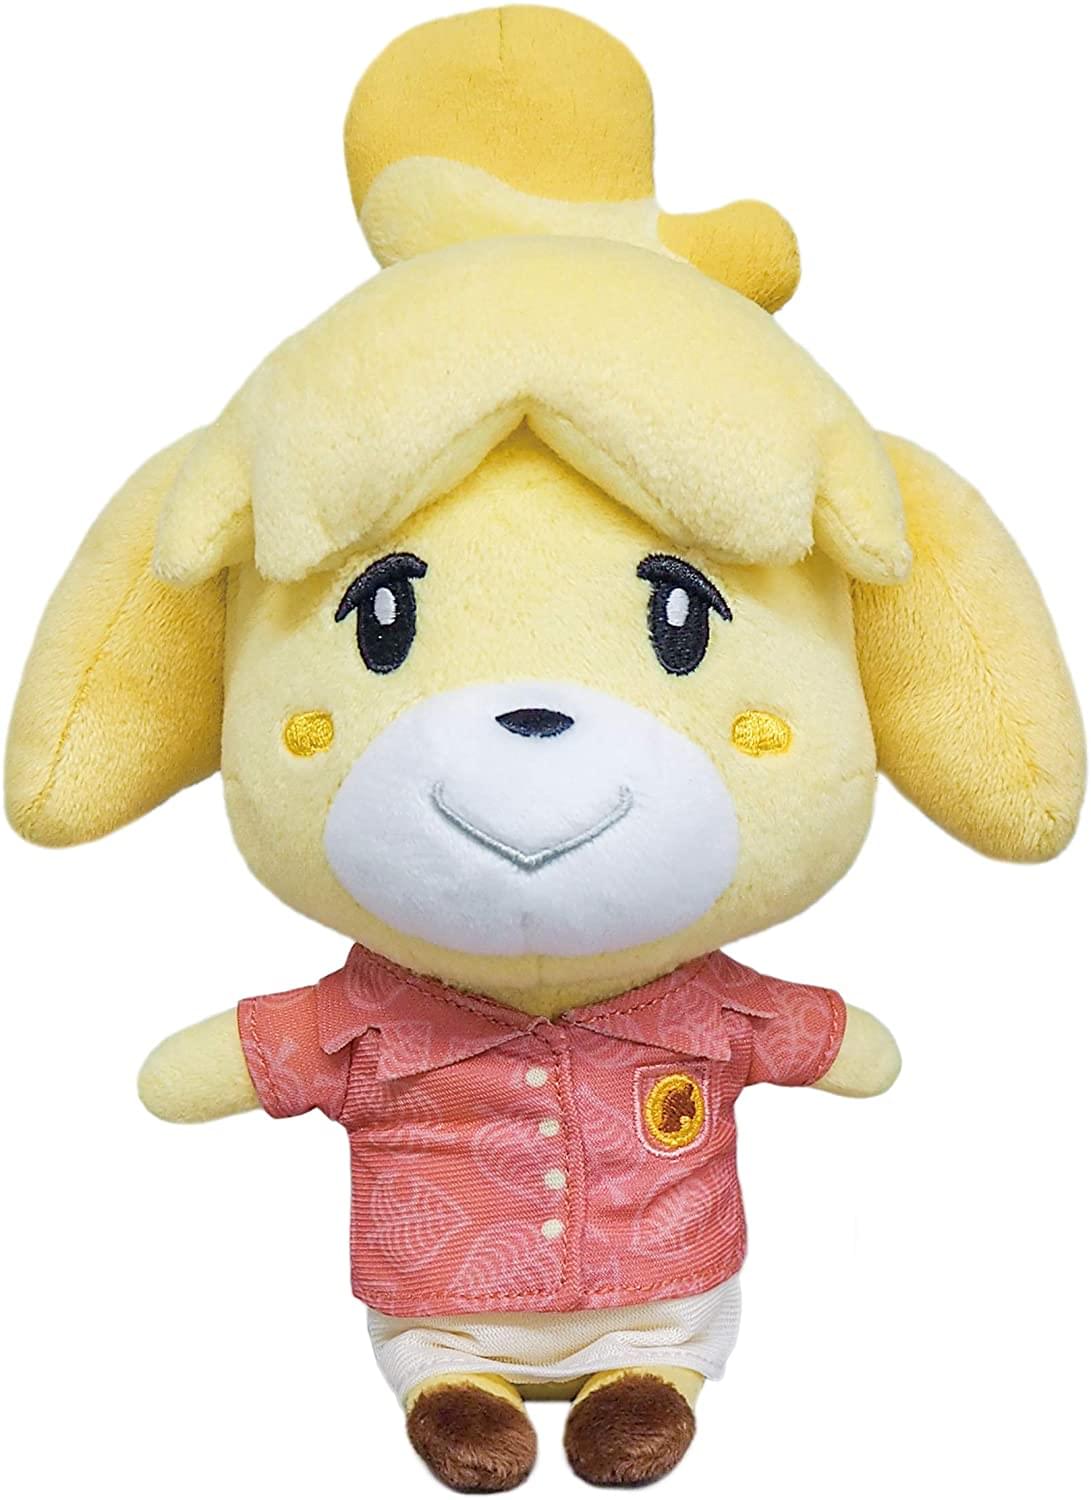 Animal Crossing New Horizons 8 Inch Plush | Isabelle